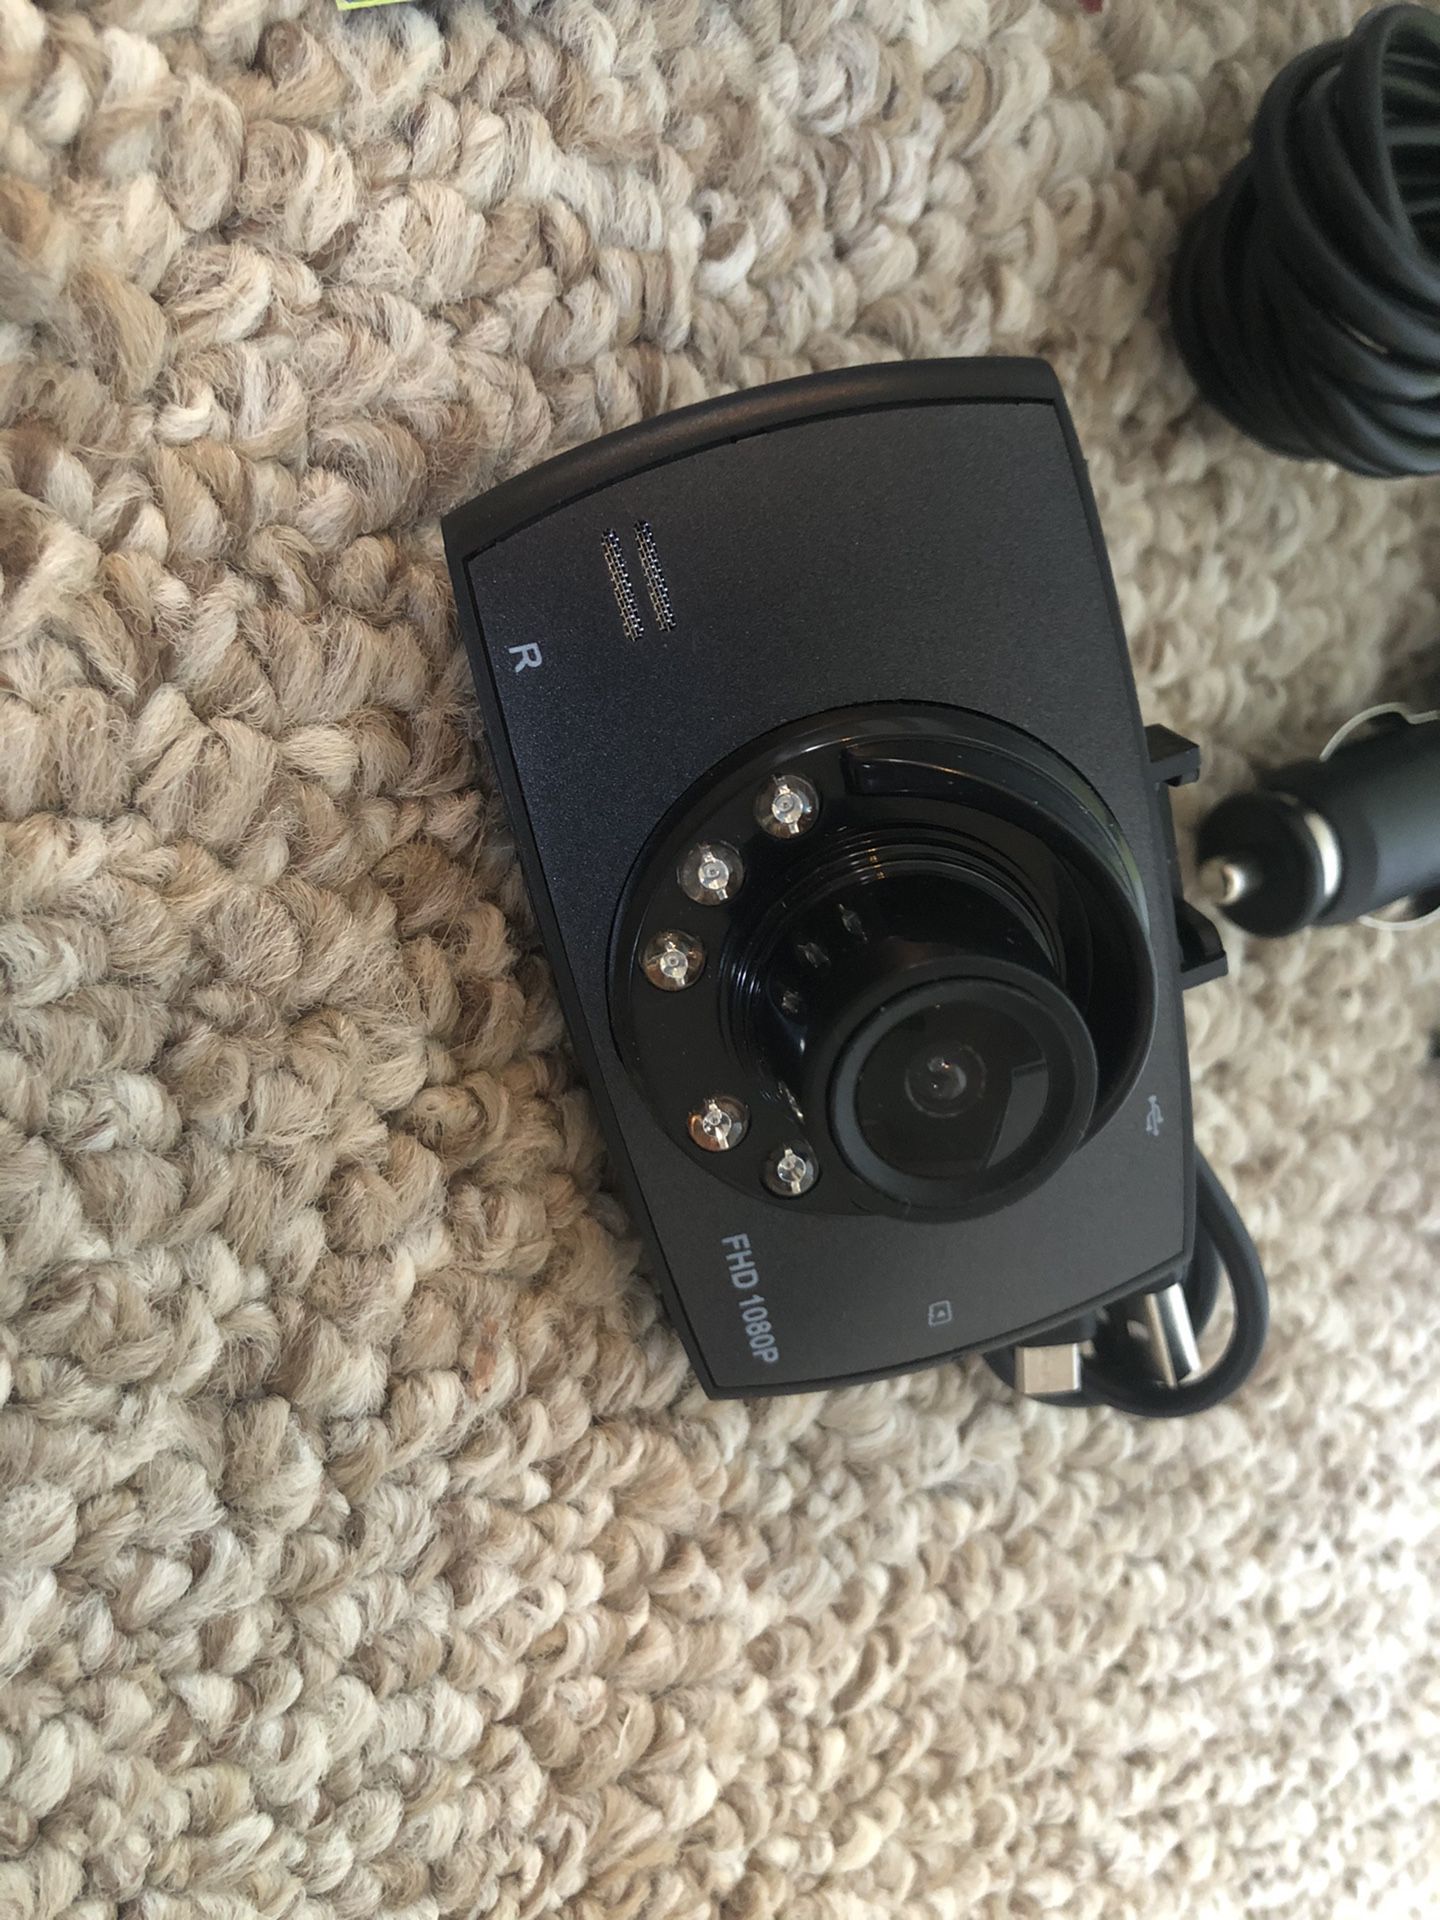 Ssontong Model A10 Dash Cam for Sale in Simi Valley, CA - OfferUp